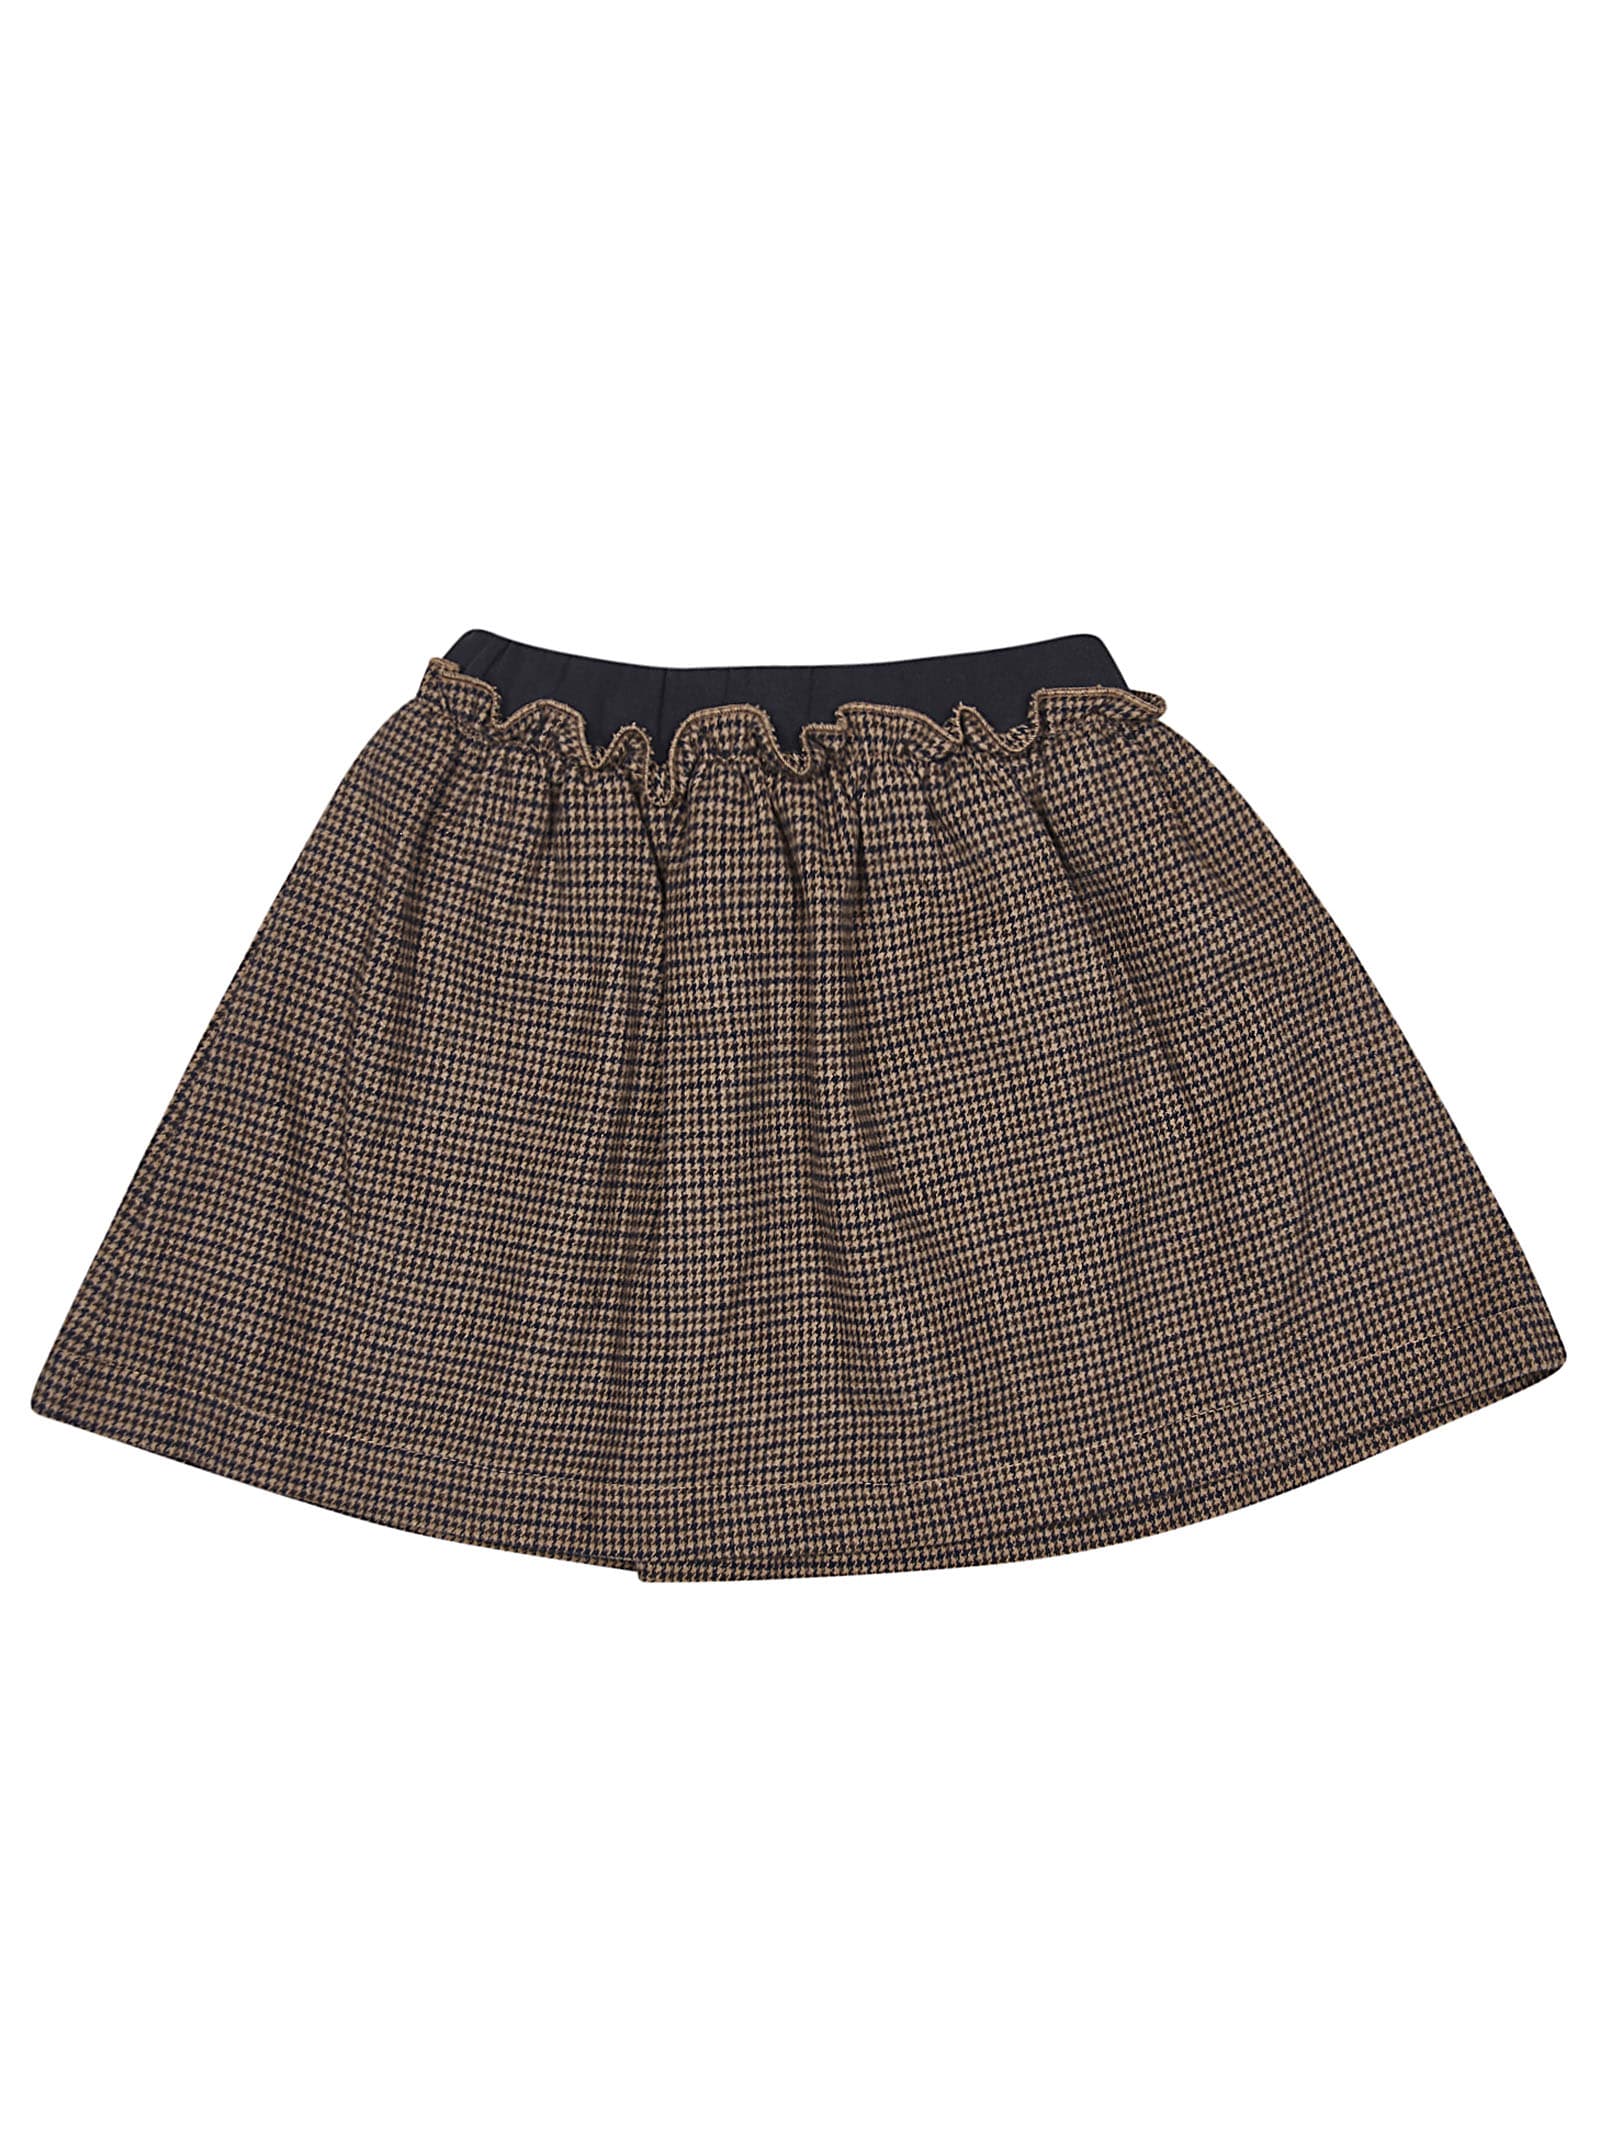 Le Petit Coco Patterned Skirt